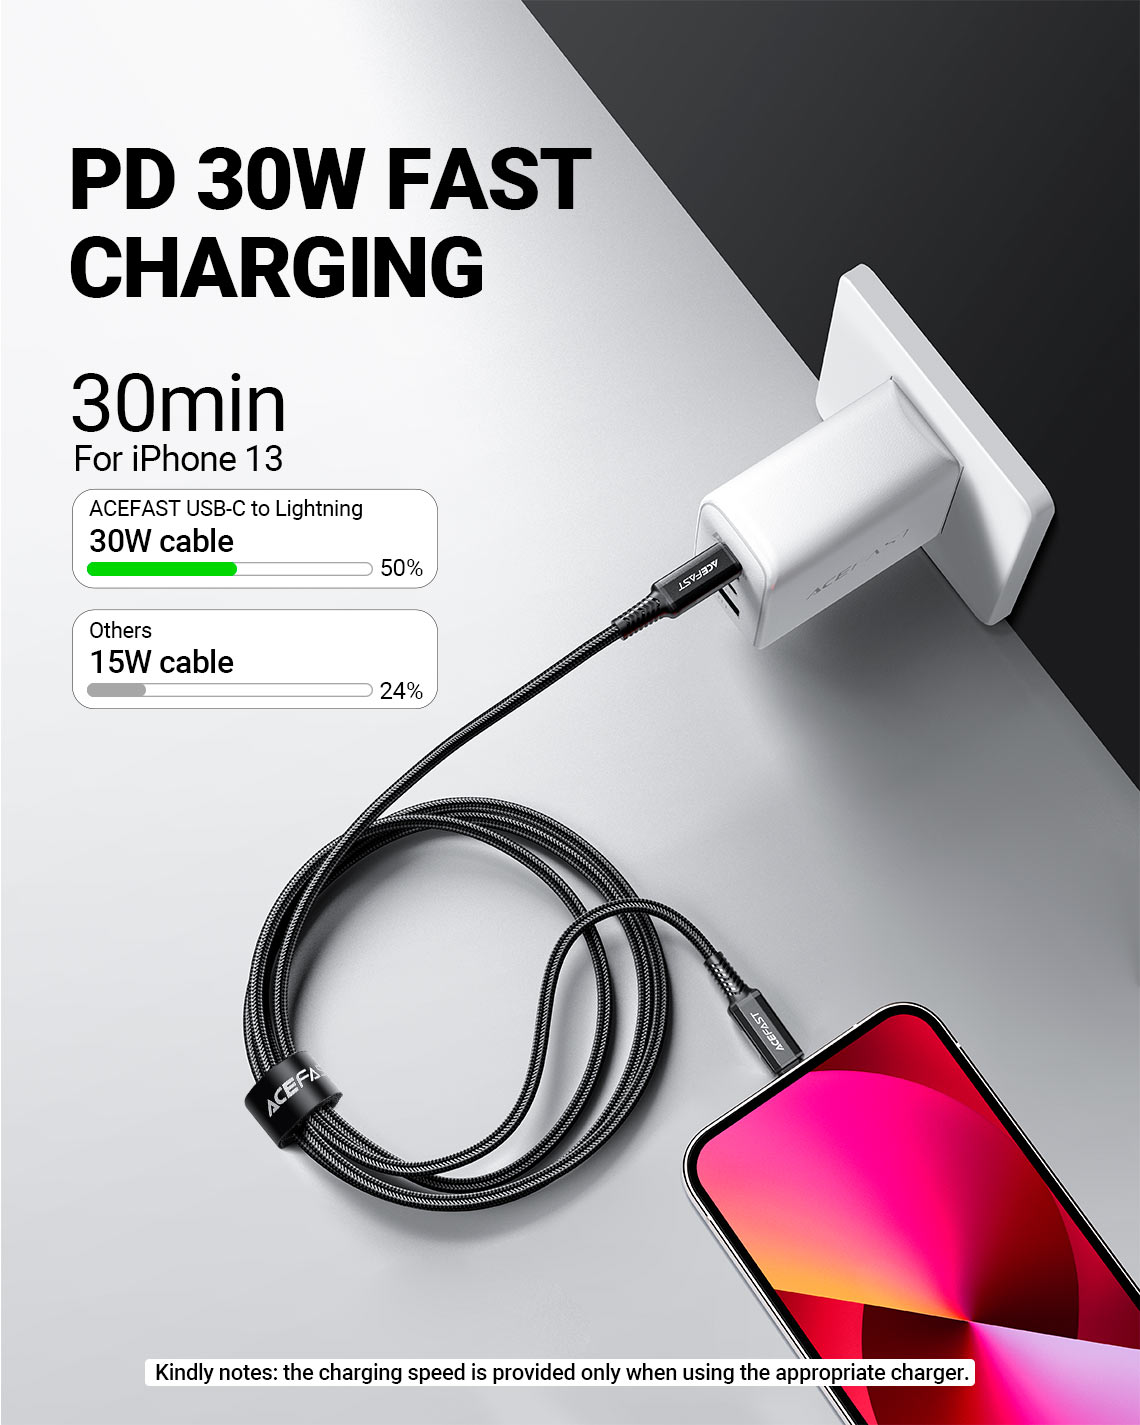 acefast c4 01 usbc to lightning charging data cable pd 30w fast charging